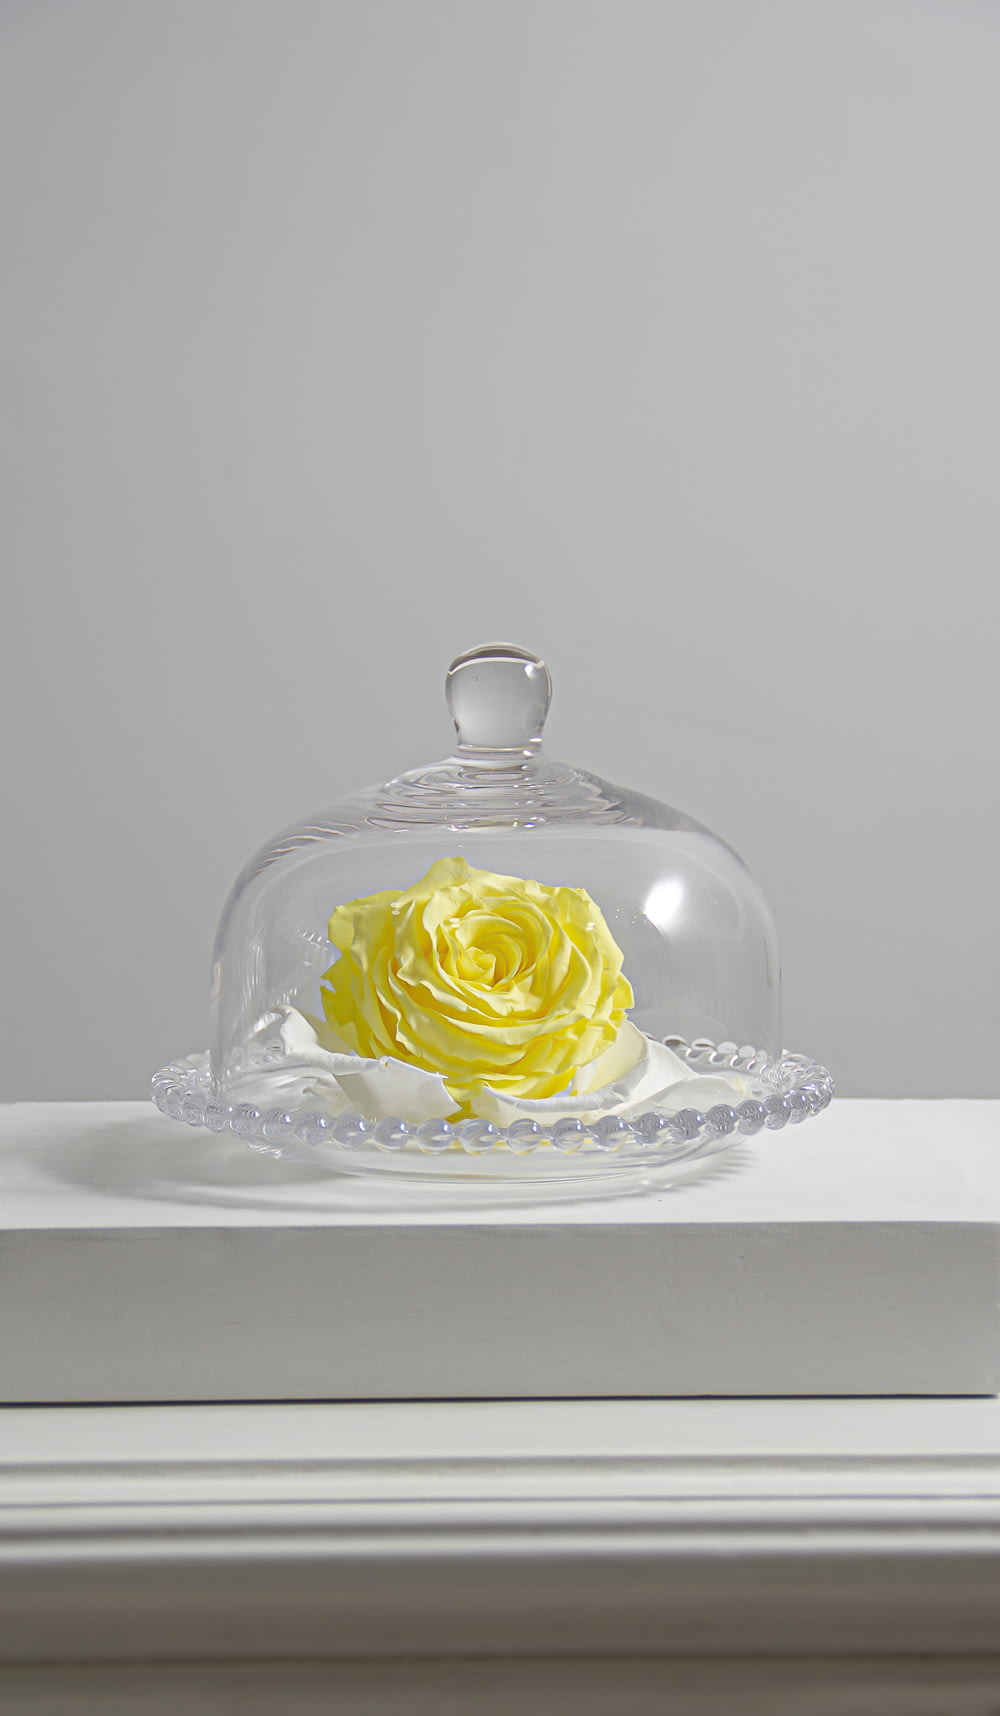 clear glass cake dome on white table